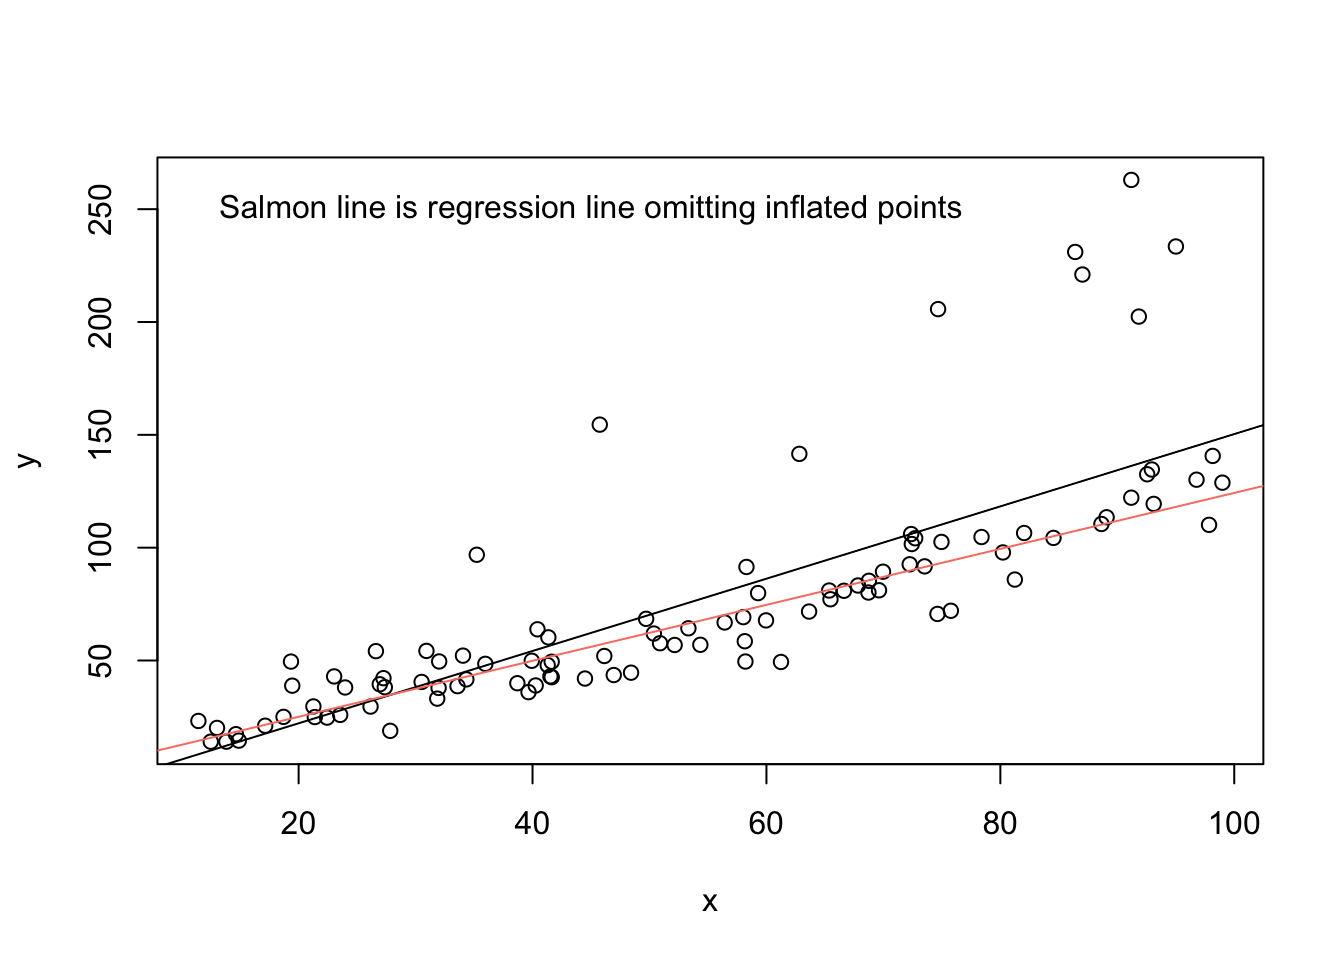 regression slope including influential points and regression slope excluding influential points